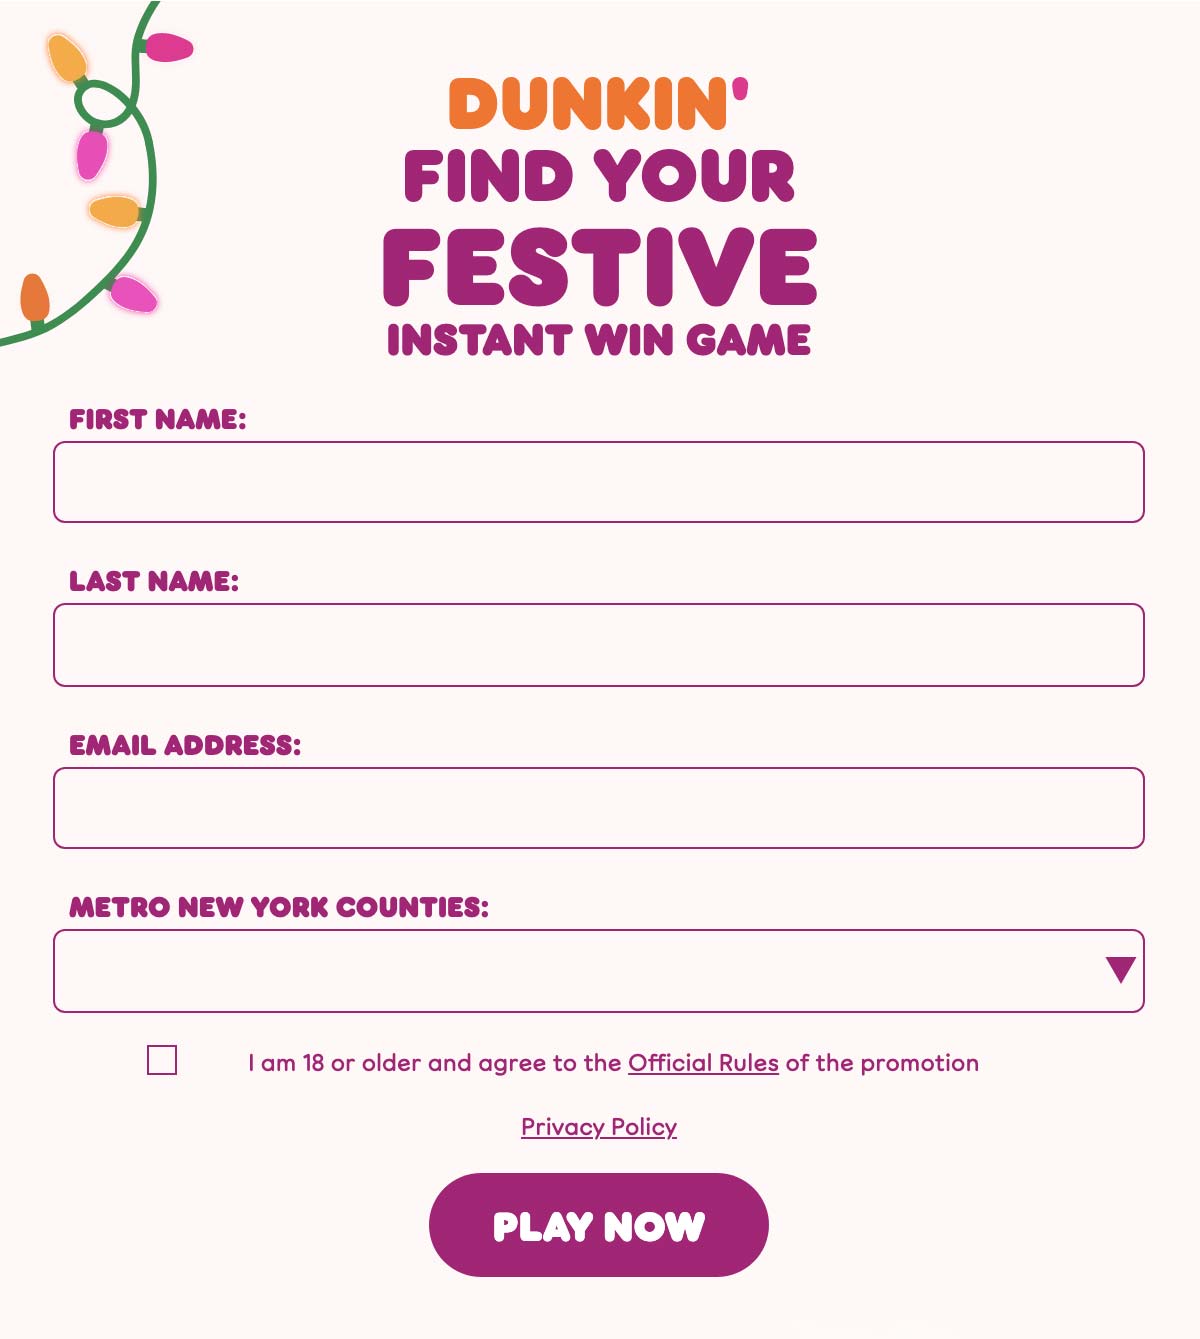 Dunkin' Find Your Festive Instant Win Game 2021-formulier.